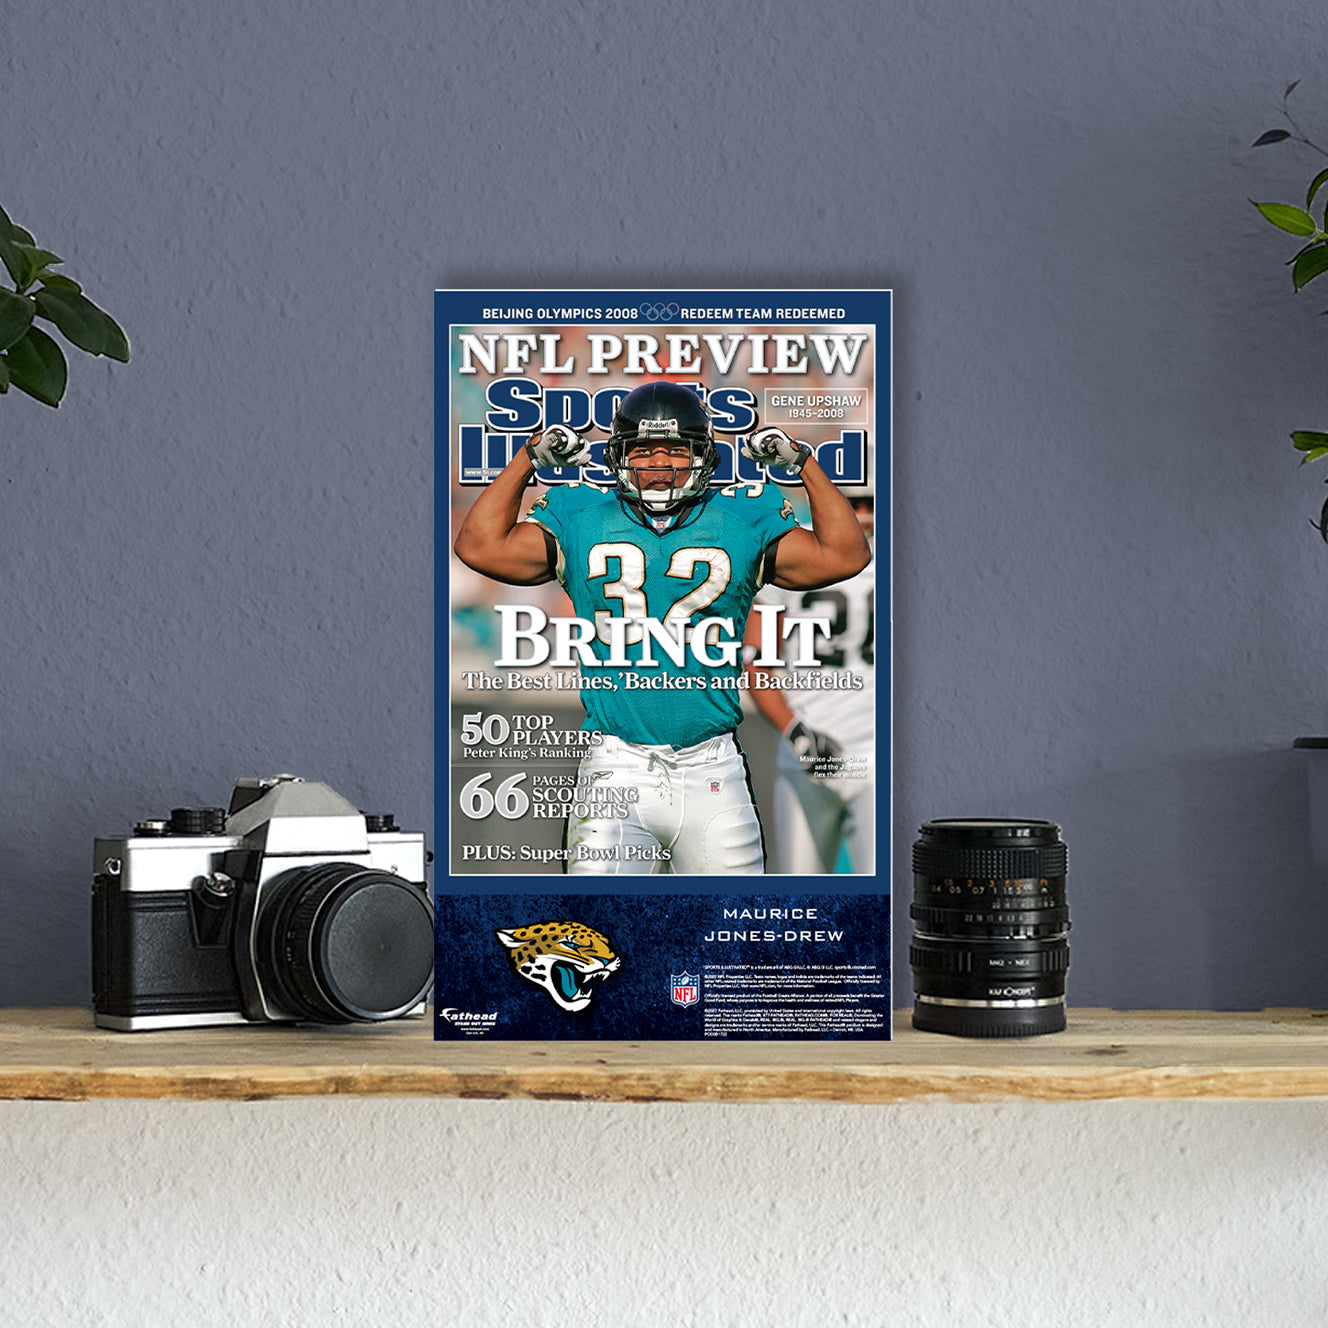 Jacksonville Jaguars: Maurice Jones-Drew September 2008 Sports Illustrated Cover  Mini   Cardstock Cutout  - Officially Licensed NFL    Stand Out